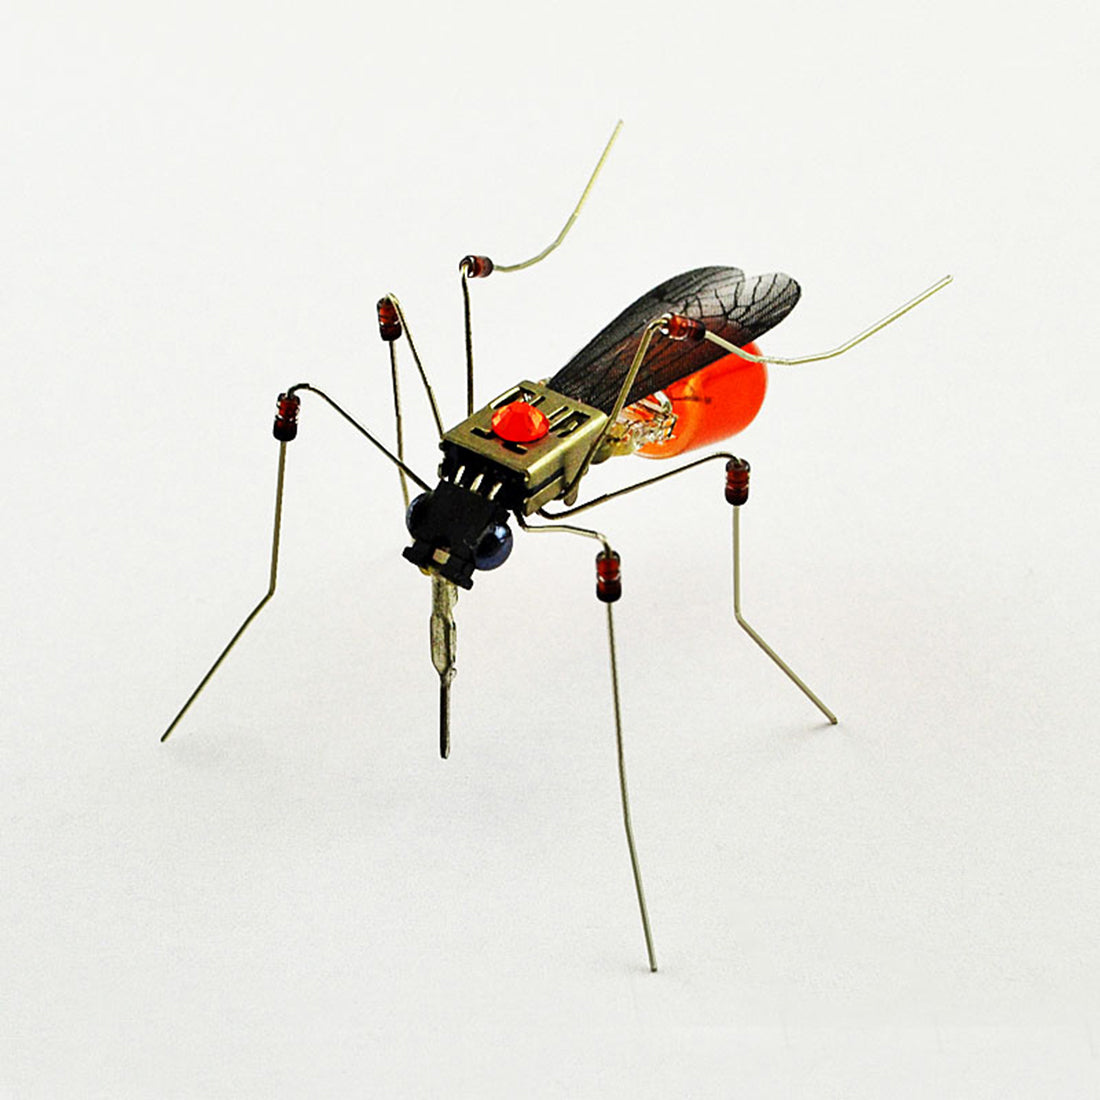 DIY Assembly Puzzle Figures Handmade Mosquito Insect Model Kit with Voice Control Base